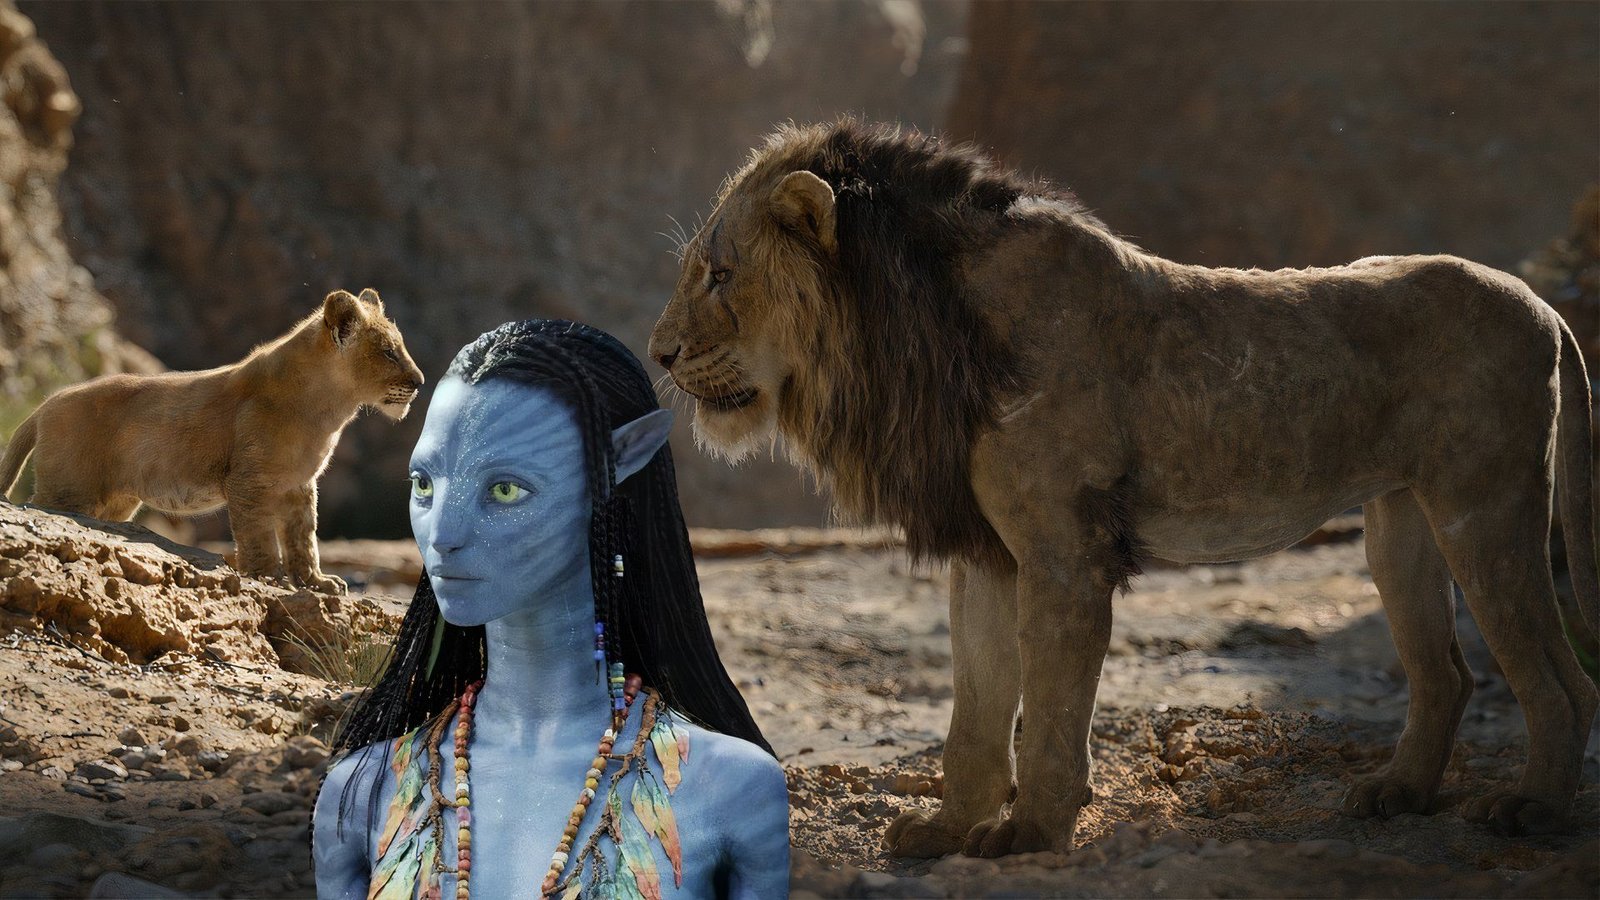 James Cameron’s Avatar Changed the VFX of Live-Action Lion King